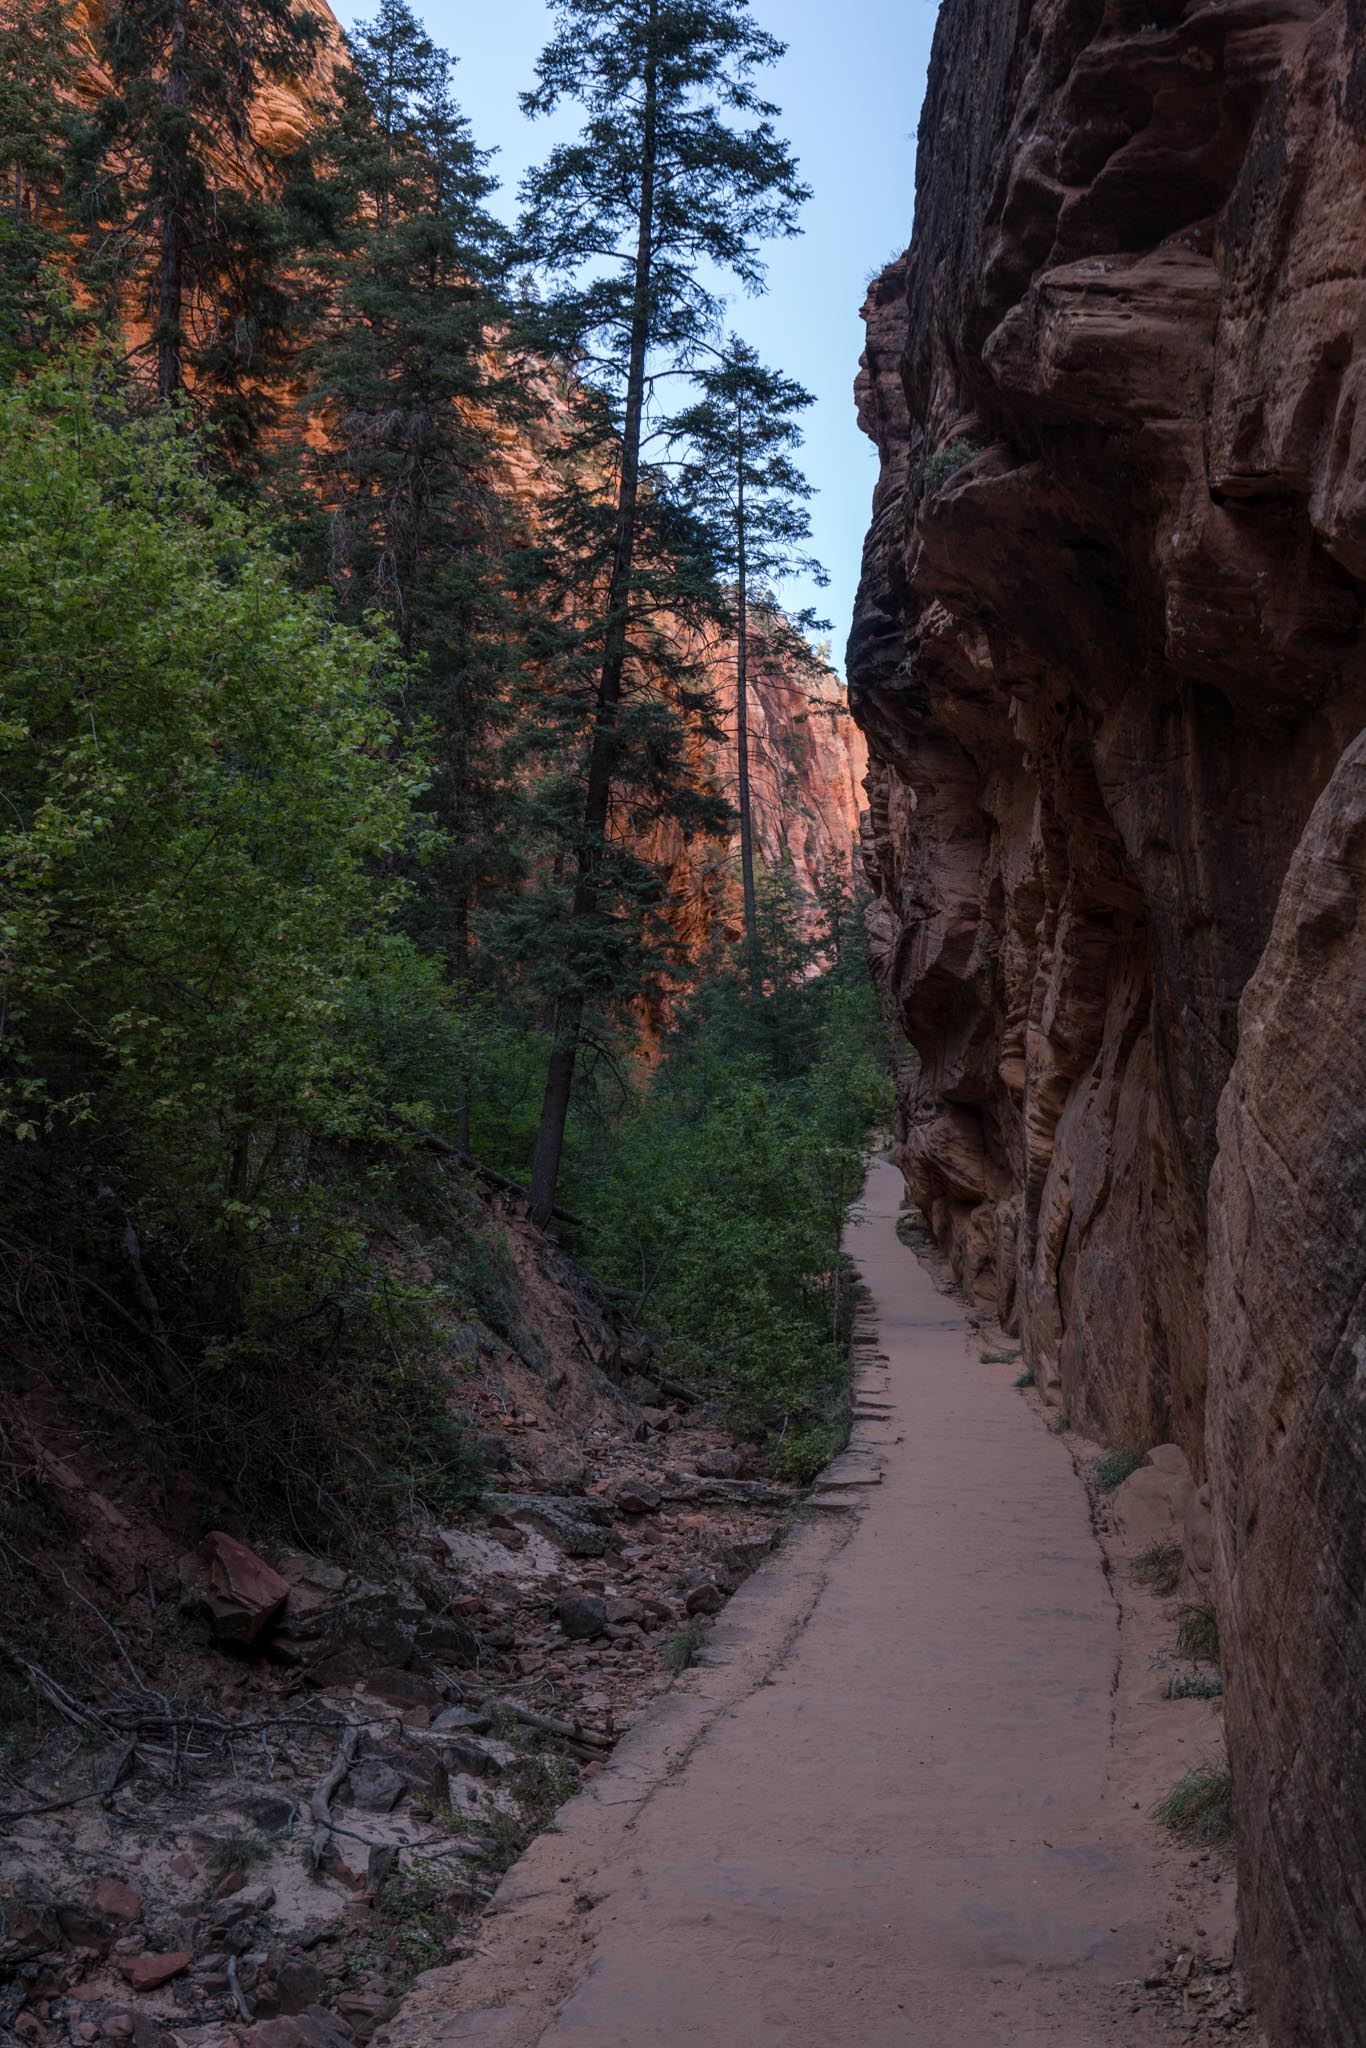 After a while the trail turns away from the main canyon and goes around the back of what ends up being Angel's Landing before the actual altitude increase begins.